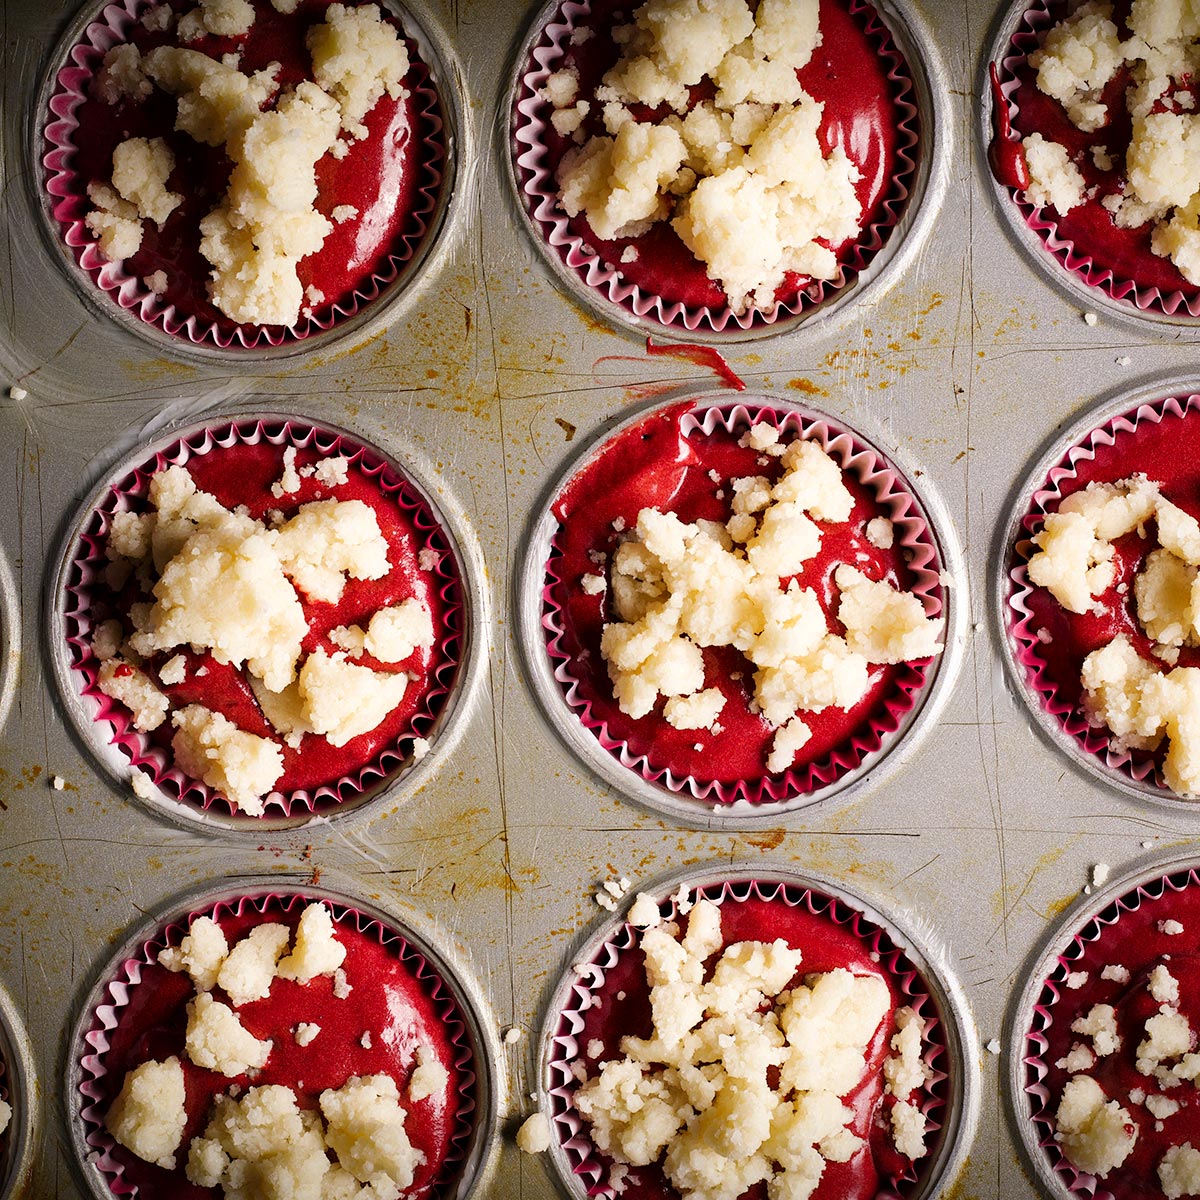 Top red velvet muffin batter with butter crumb topping before baking.